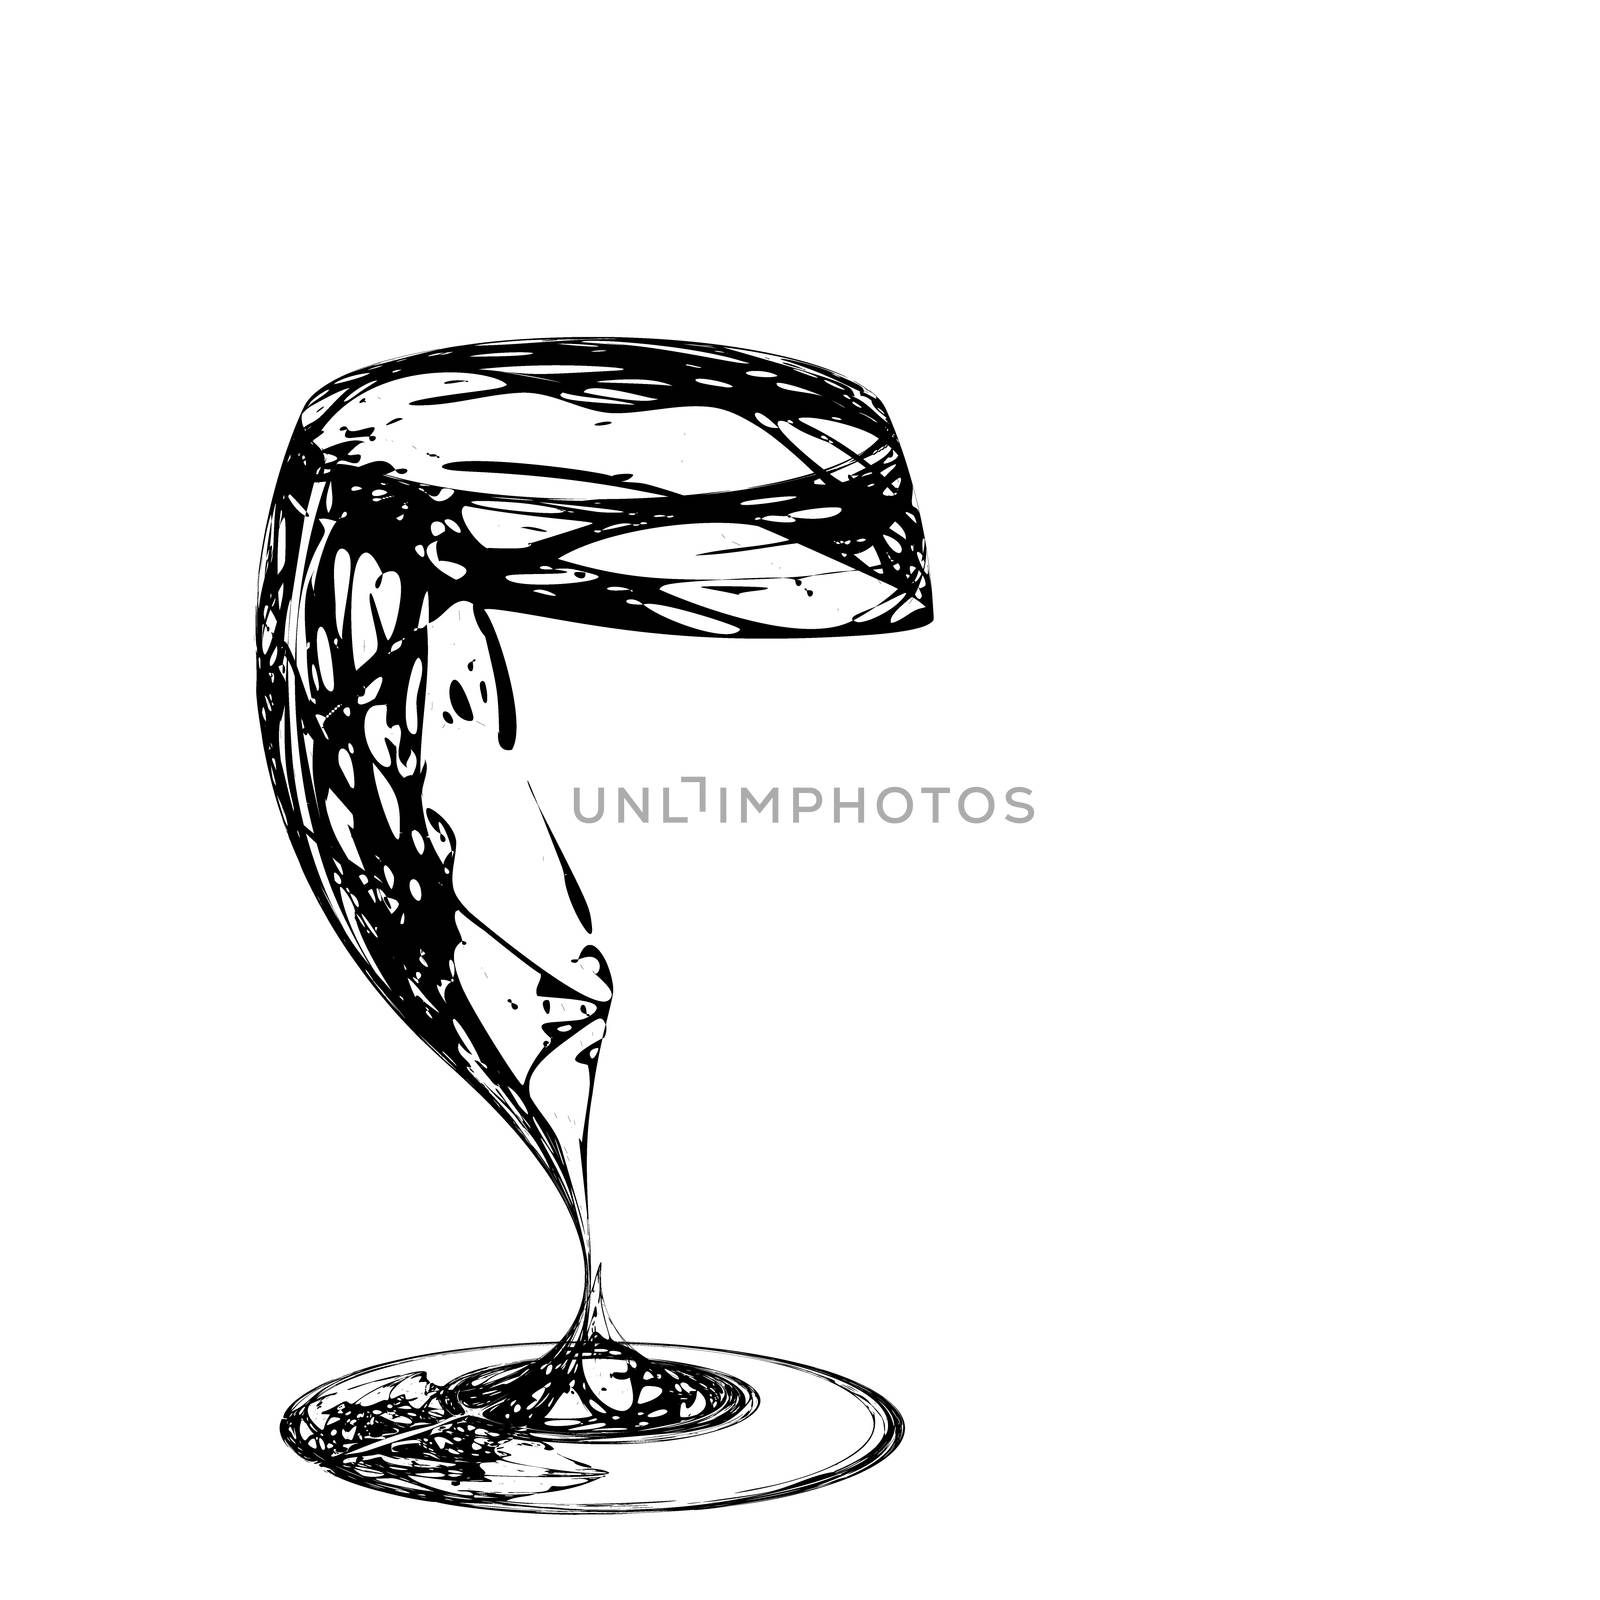 The stylized wine glass for fault  by H2Oshka